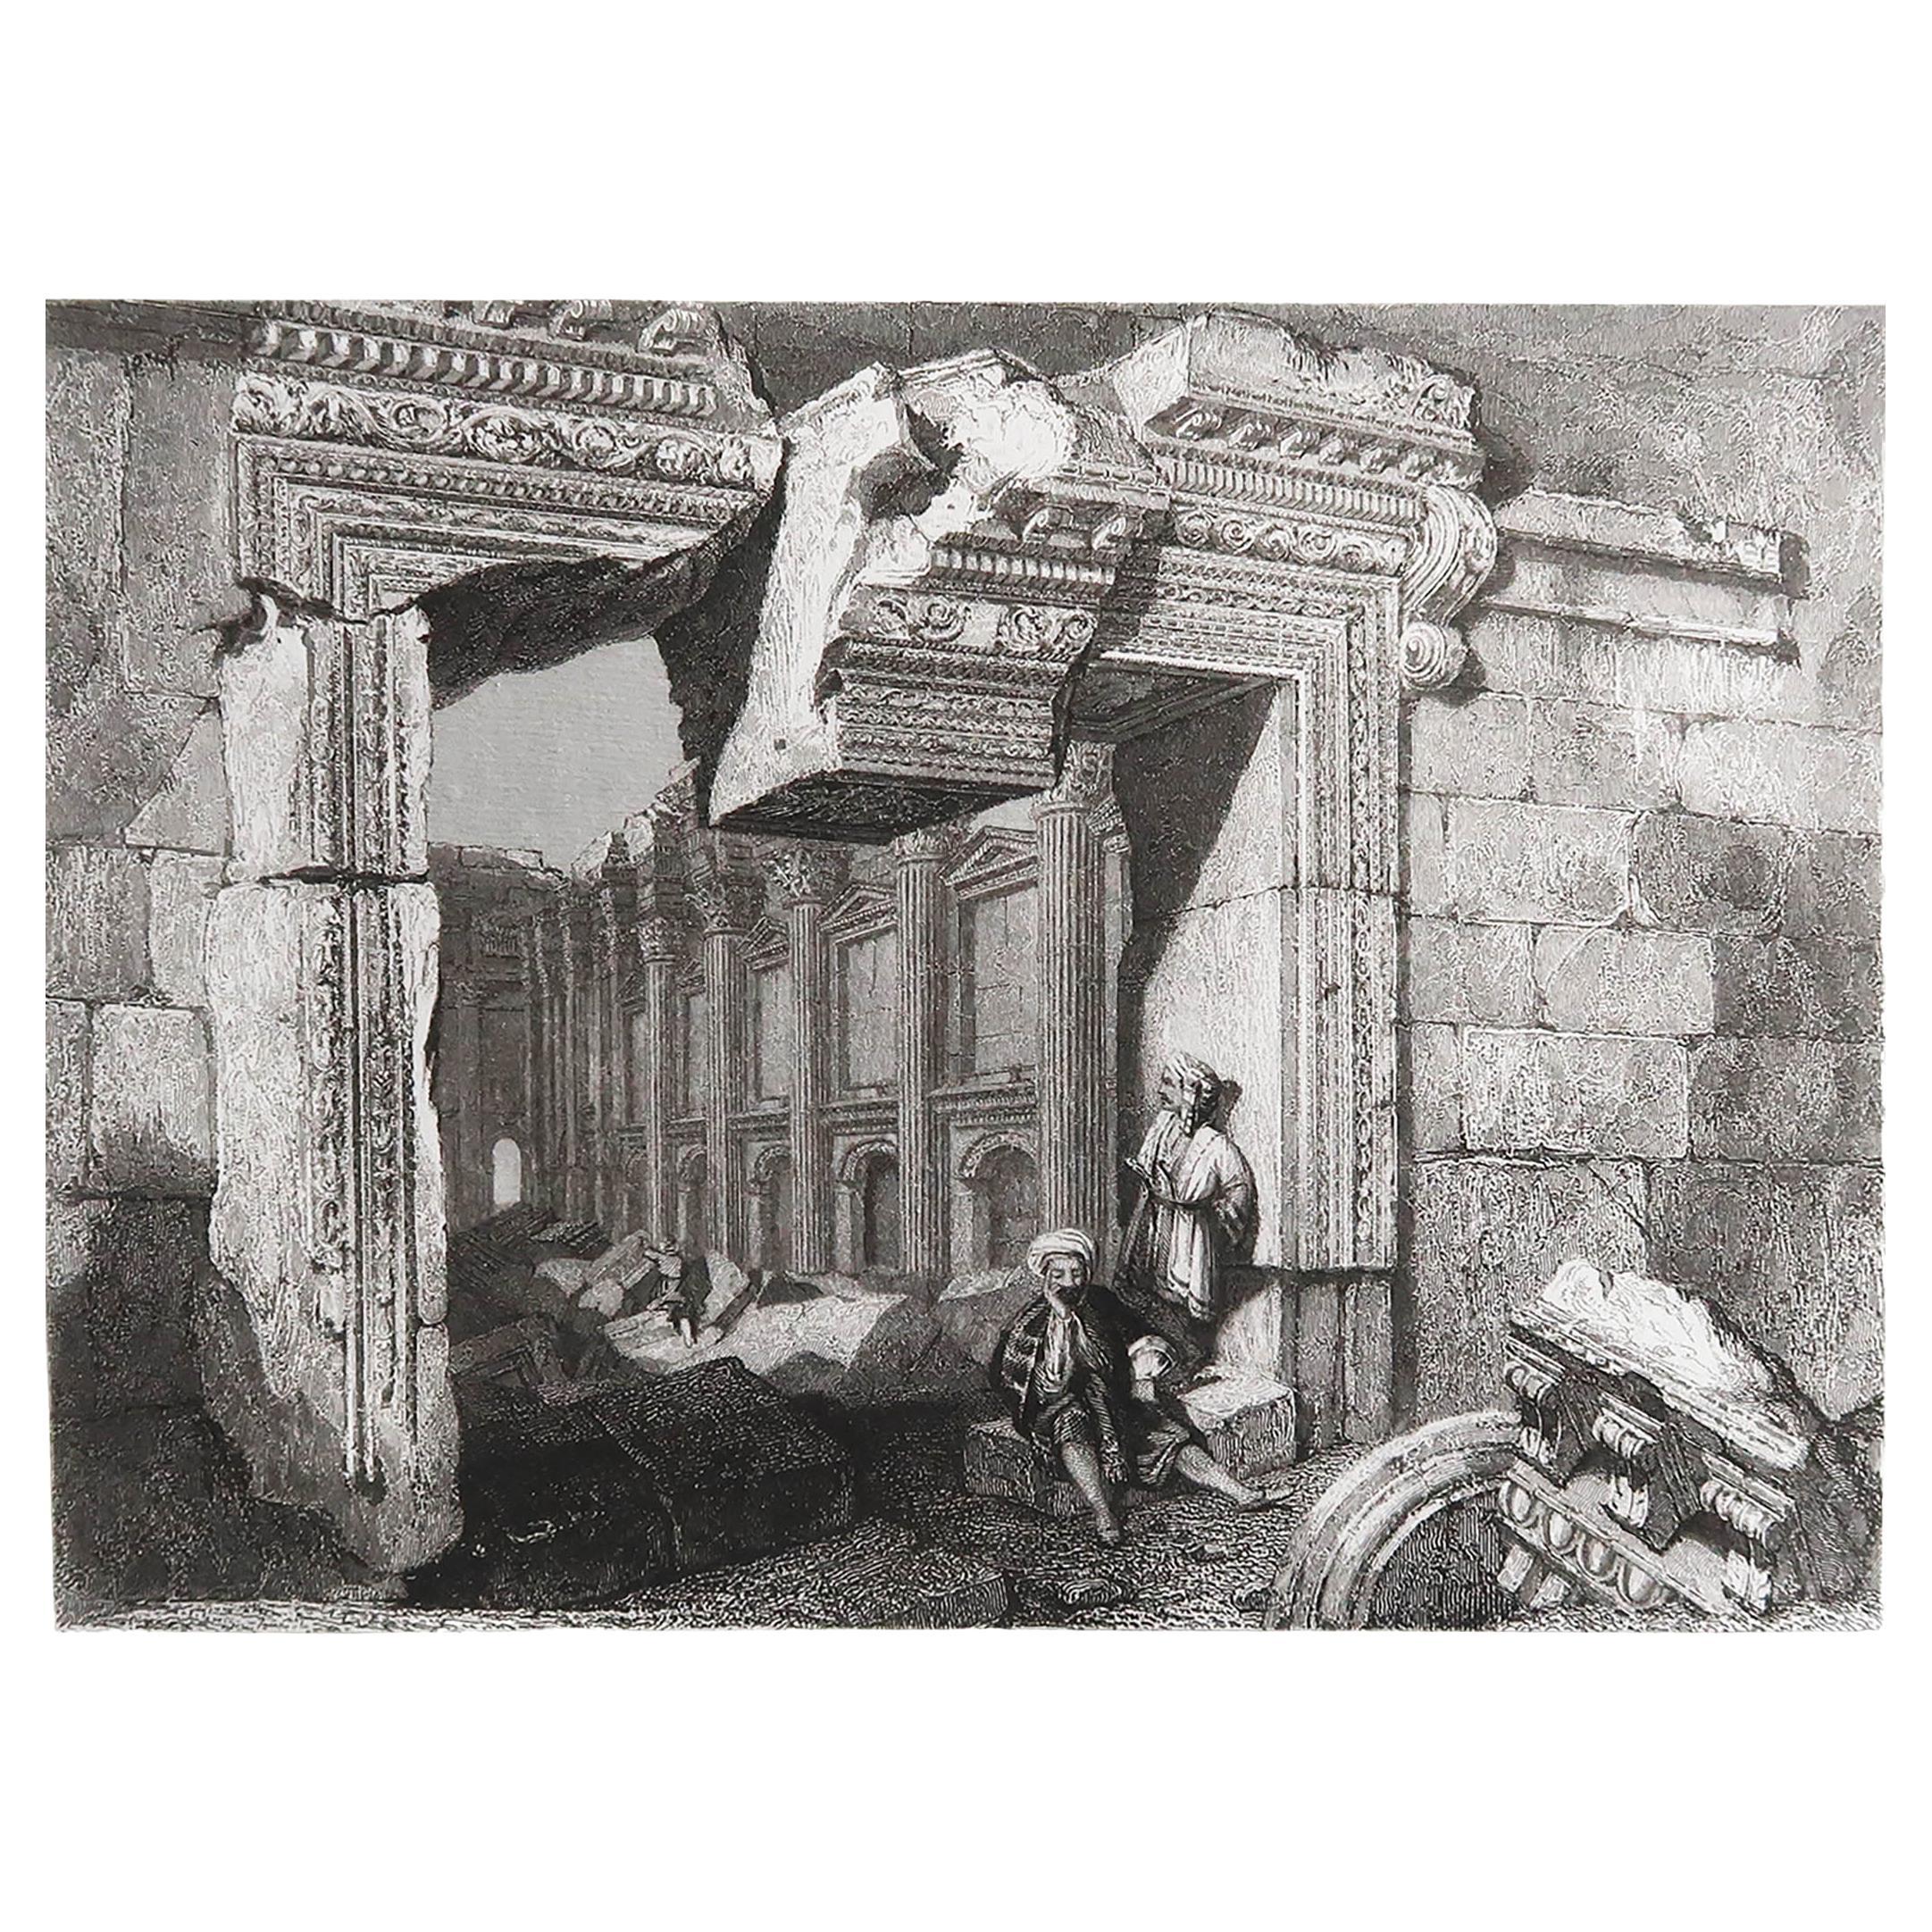 Original Antique Print of the Temple of Baalbek Gate, Lebanon. Dated 1835